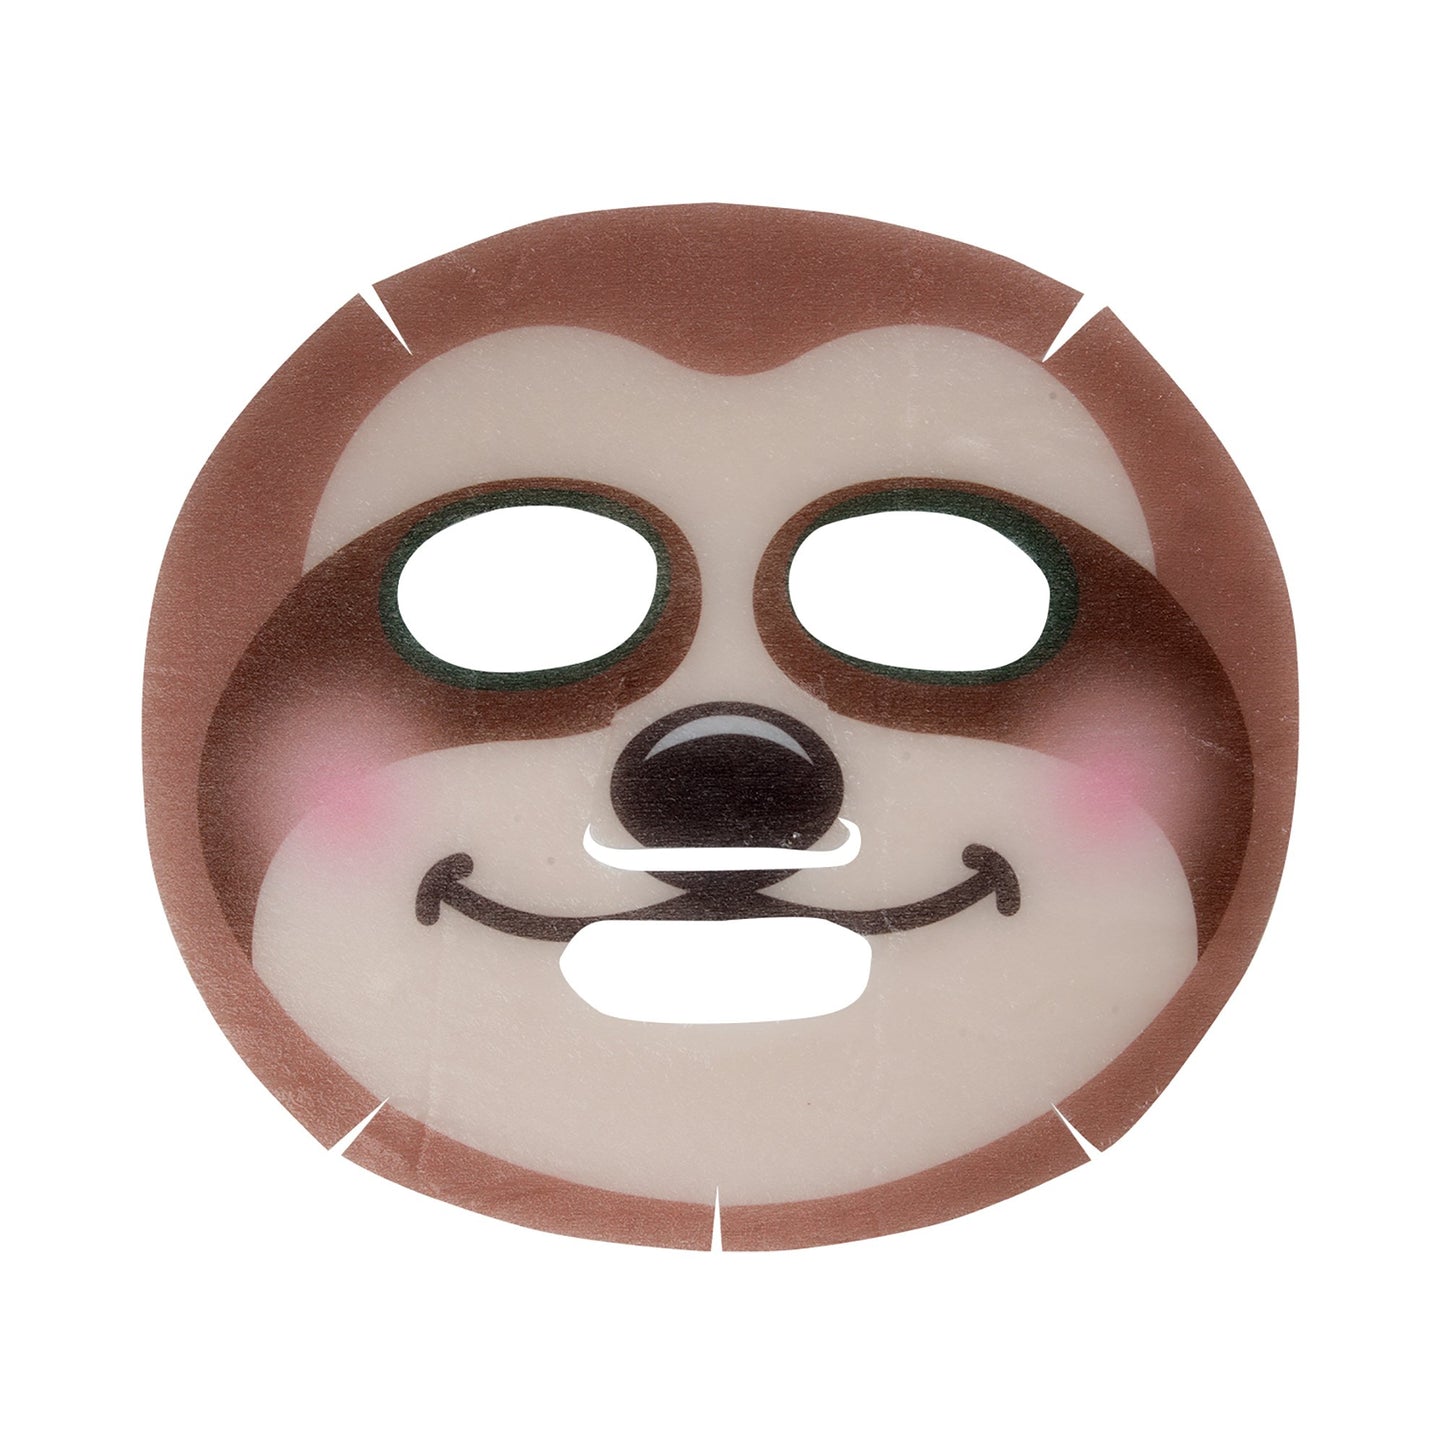 Slow Down, Skin! Animated Sloth Face Mask - Renewing Rose - The Crème Shop